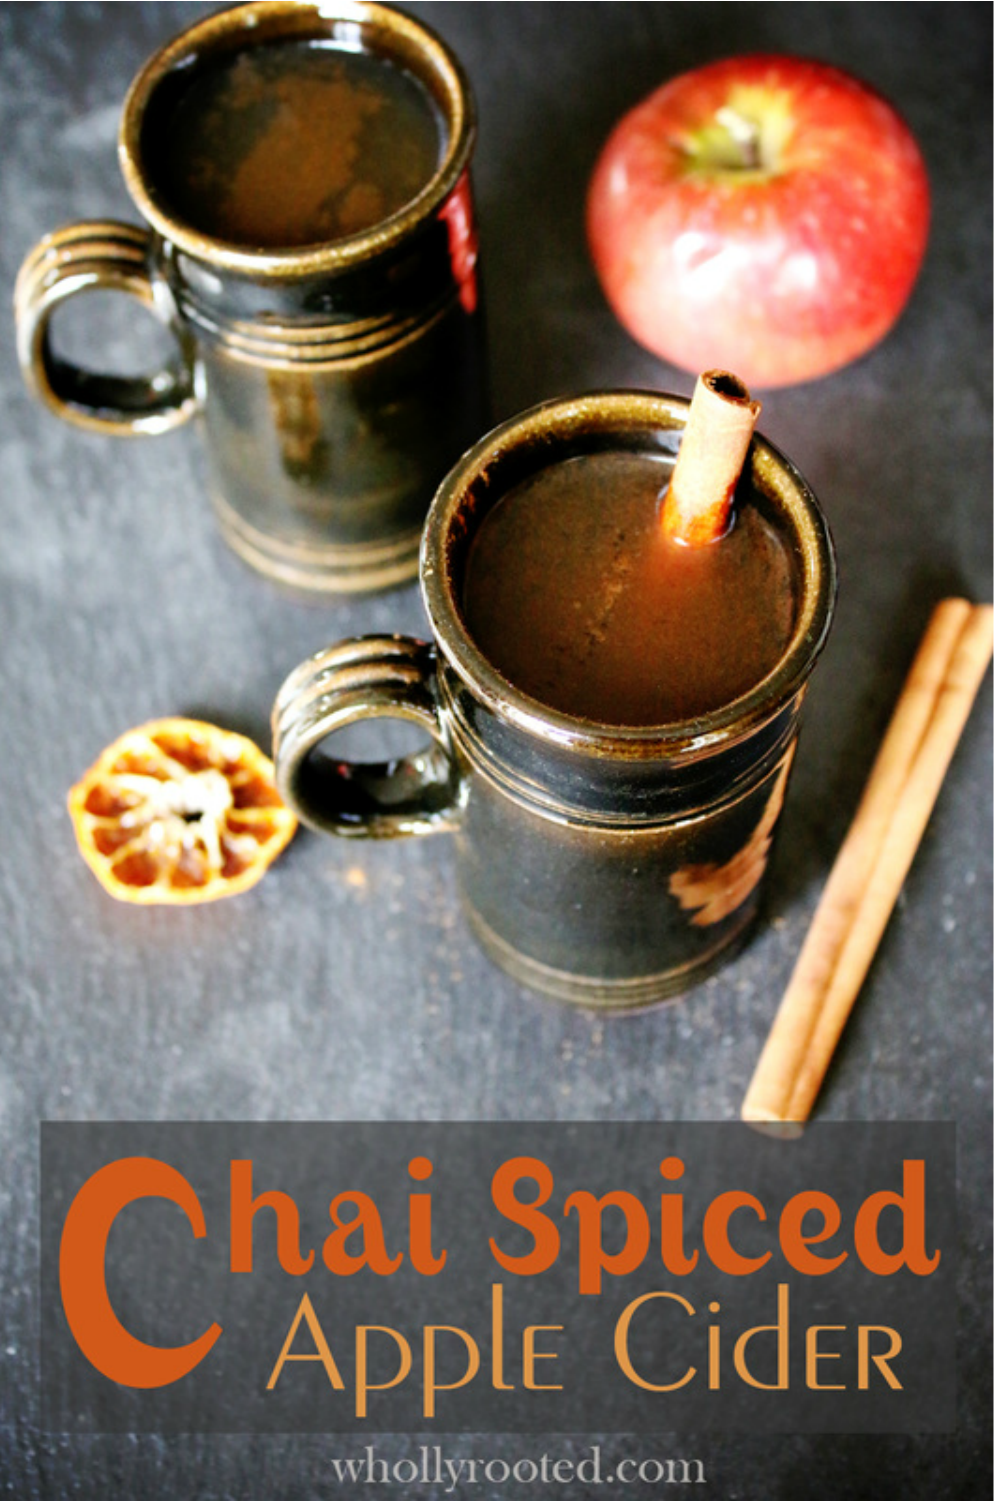 Chai Spiced Apple Cider @ Wholly Rooted